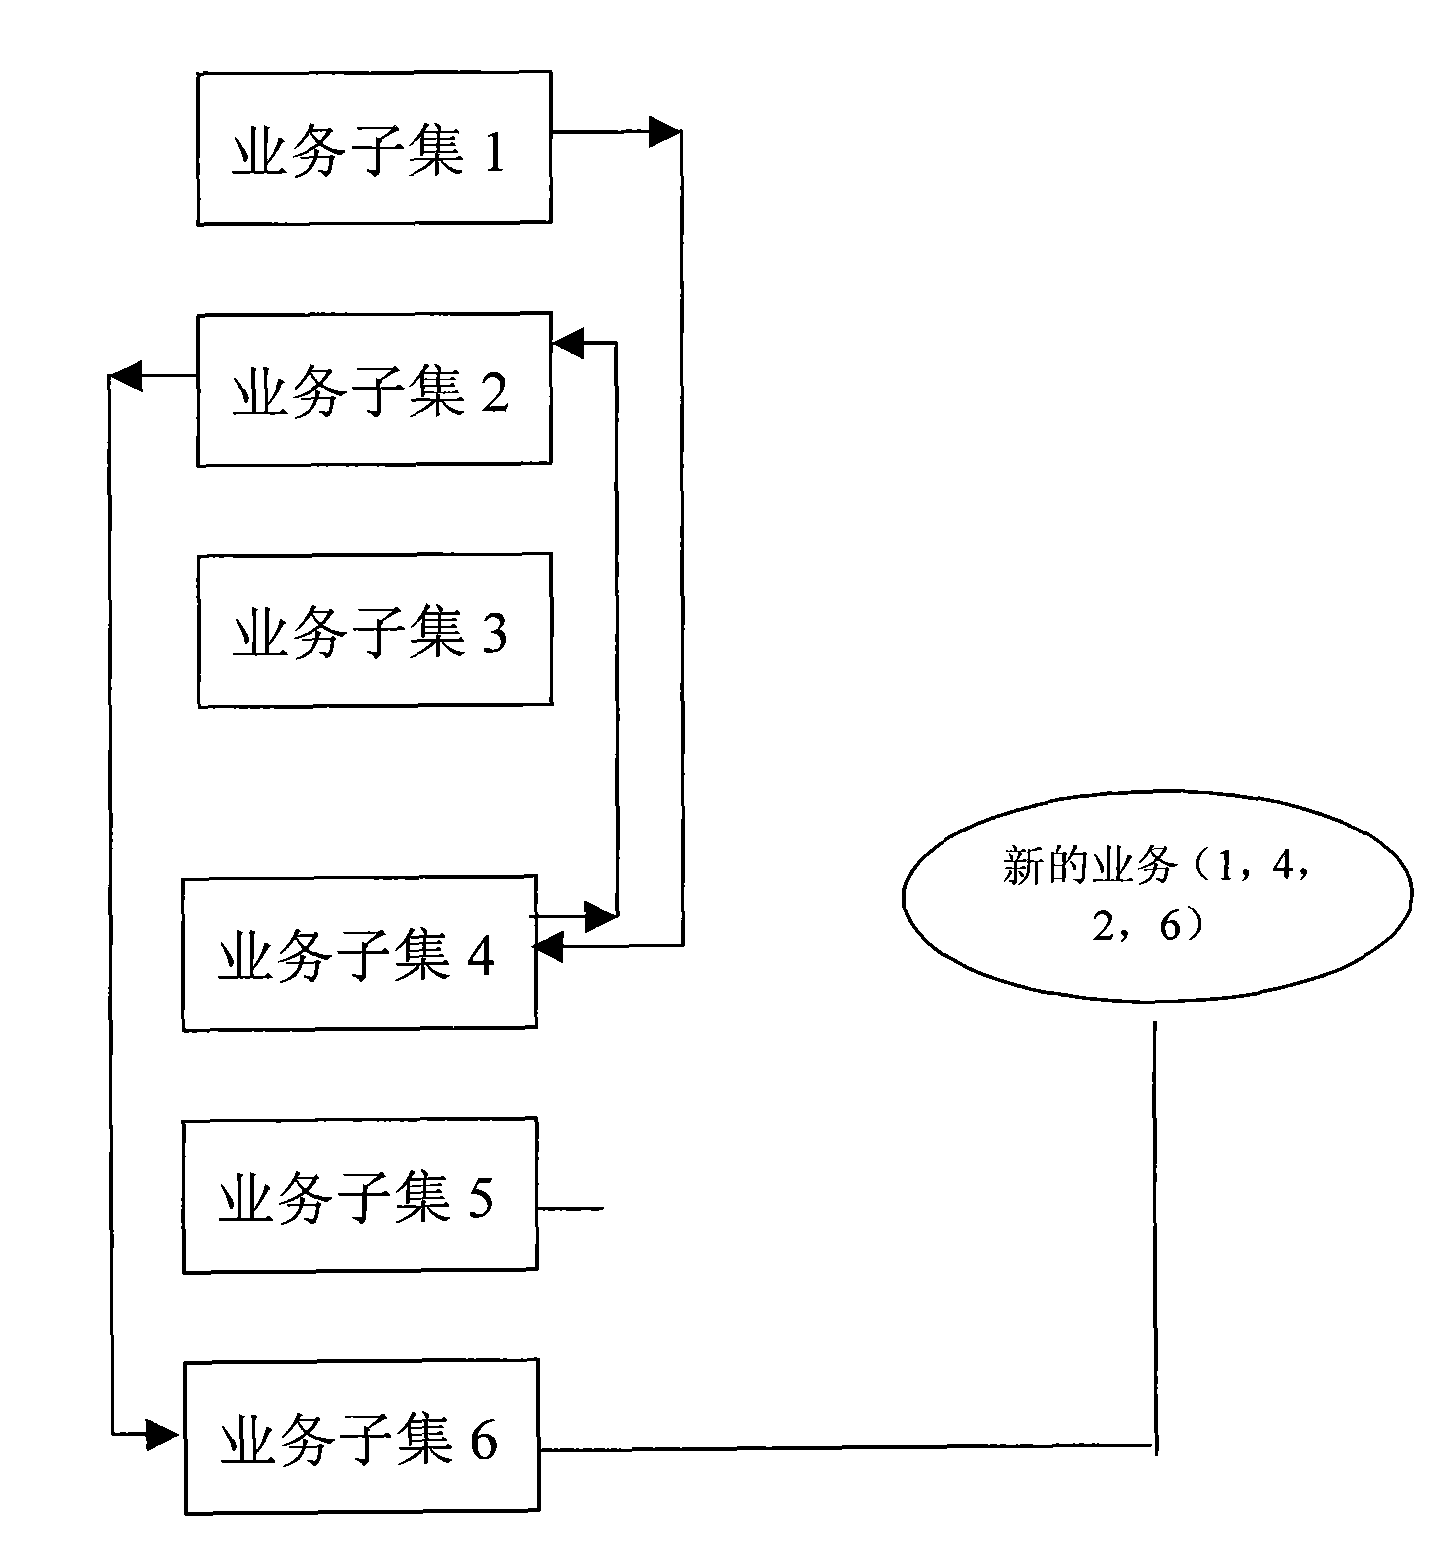 Method for designing dispatcher training architecture based on service drive